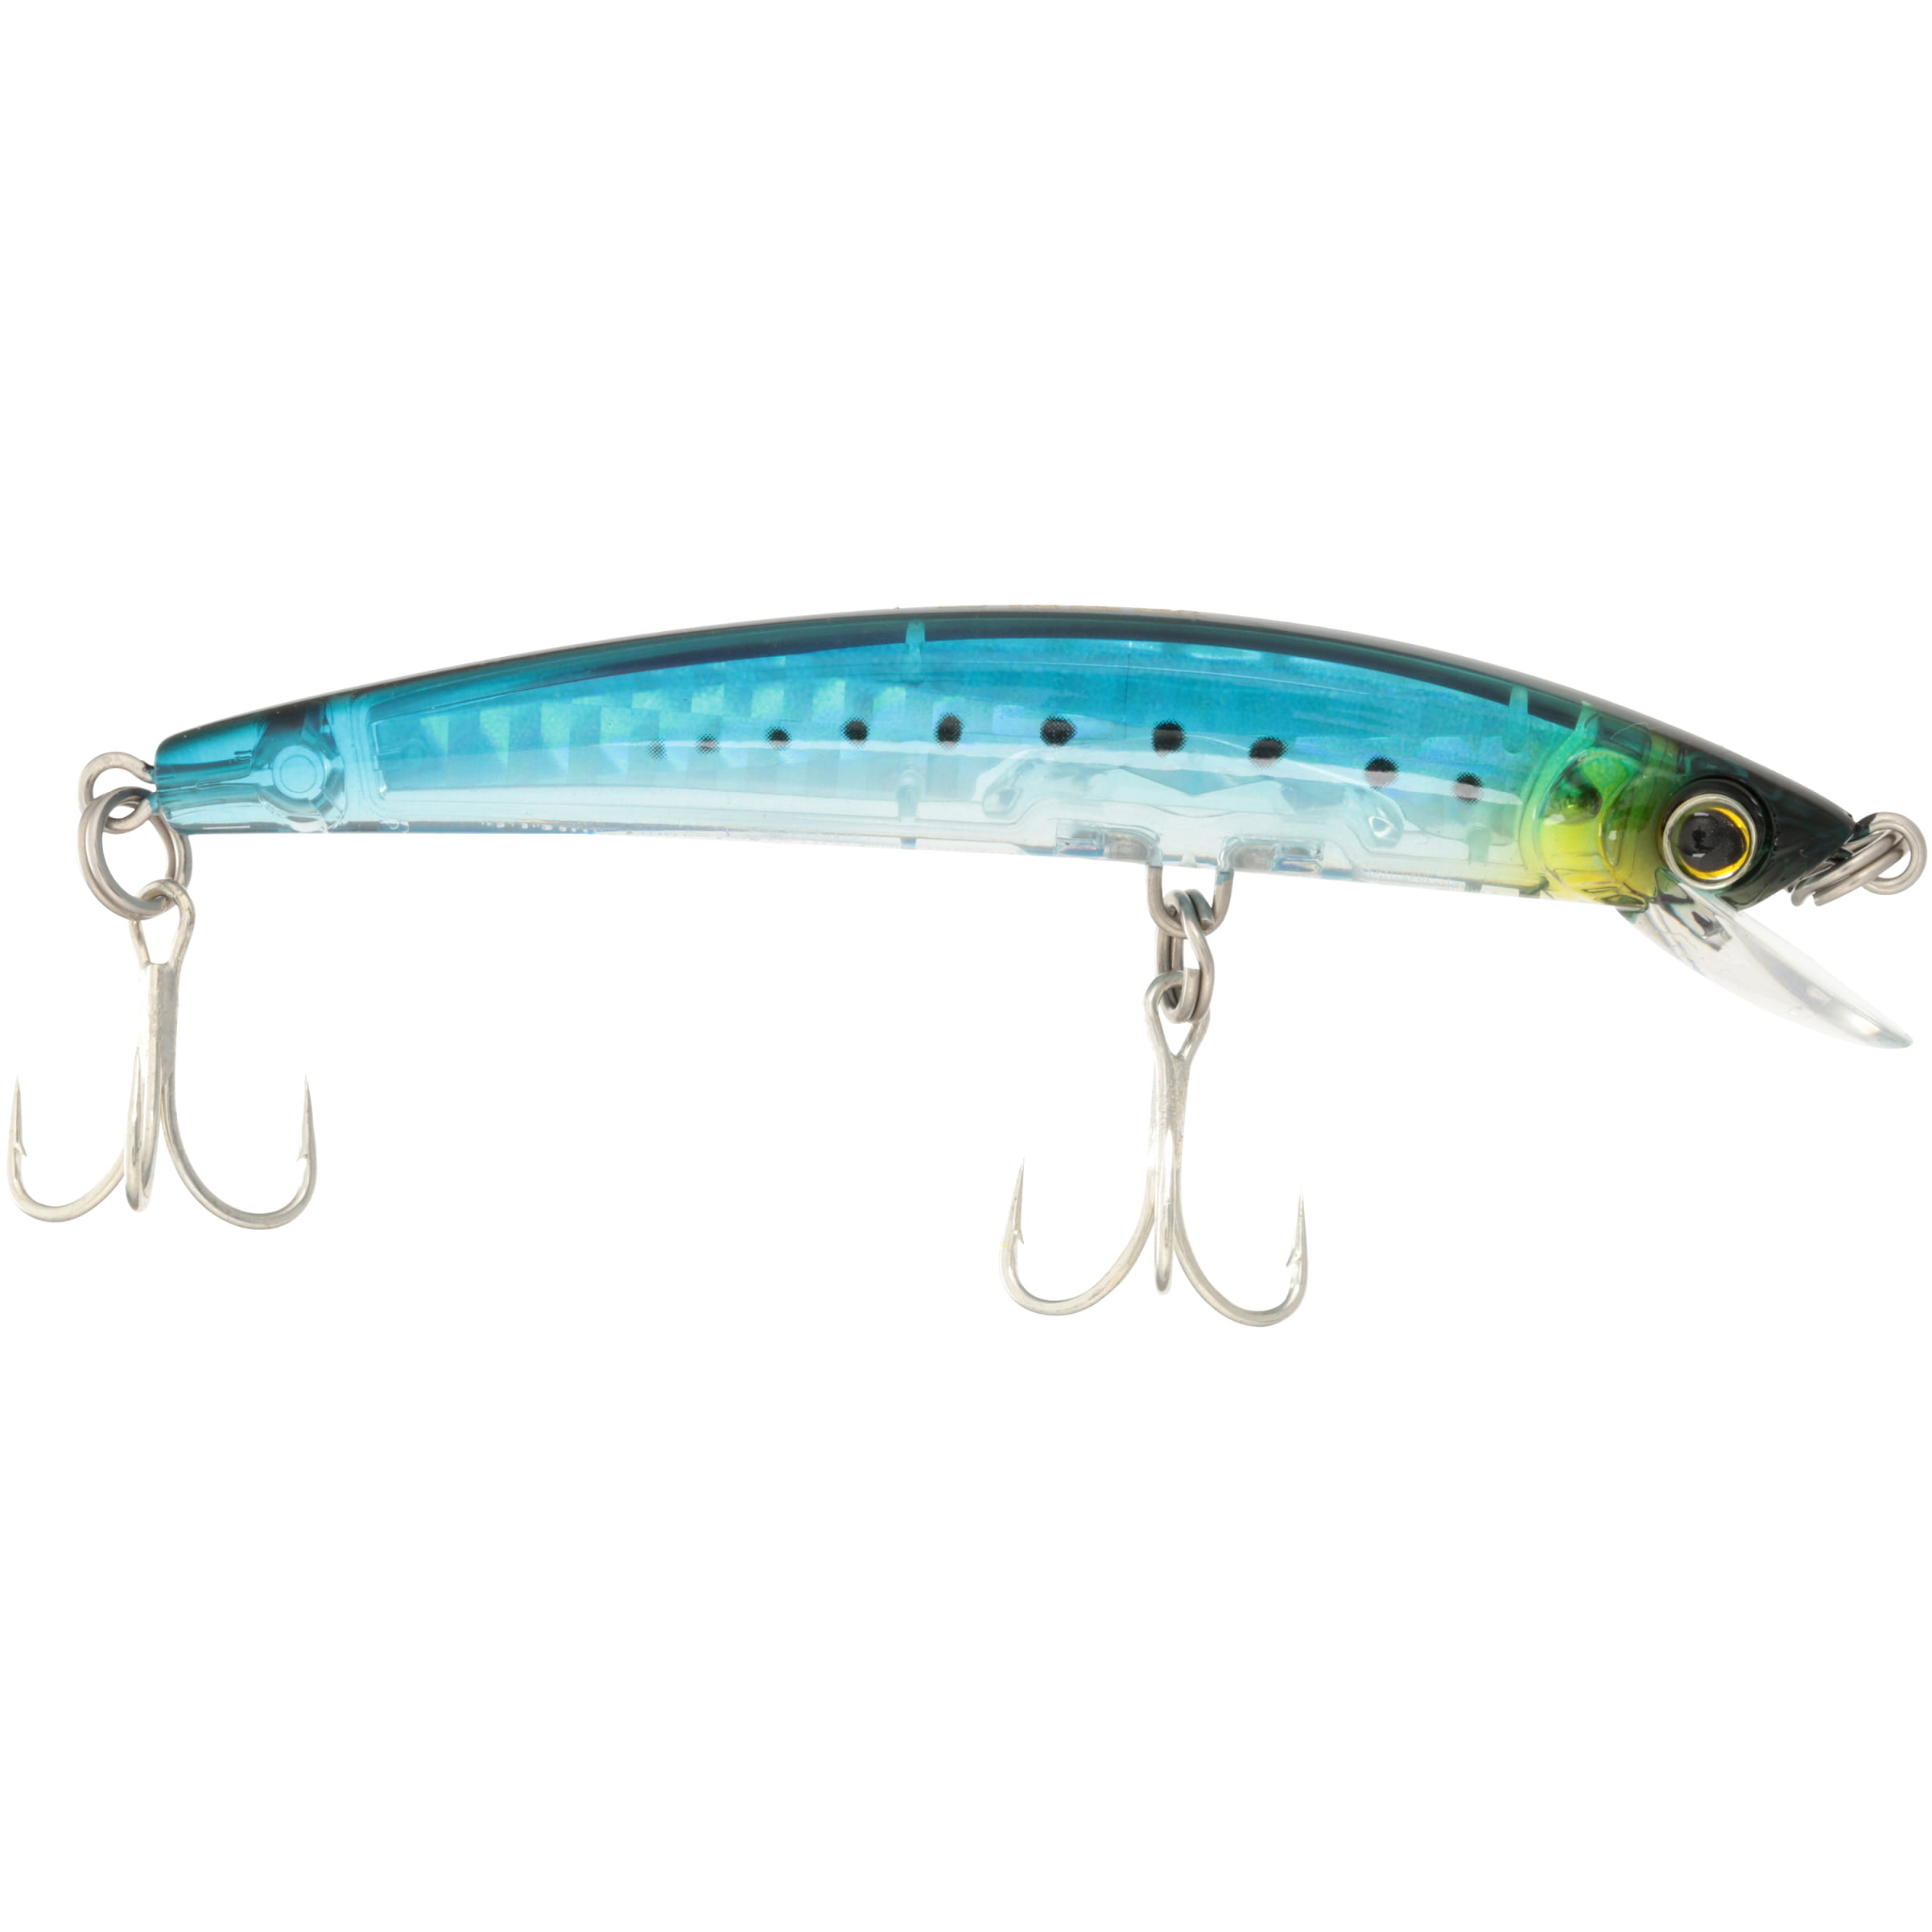 Yo-Zuri 3d Prism Finish Crystal Minnow Floating Lure for sale online